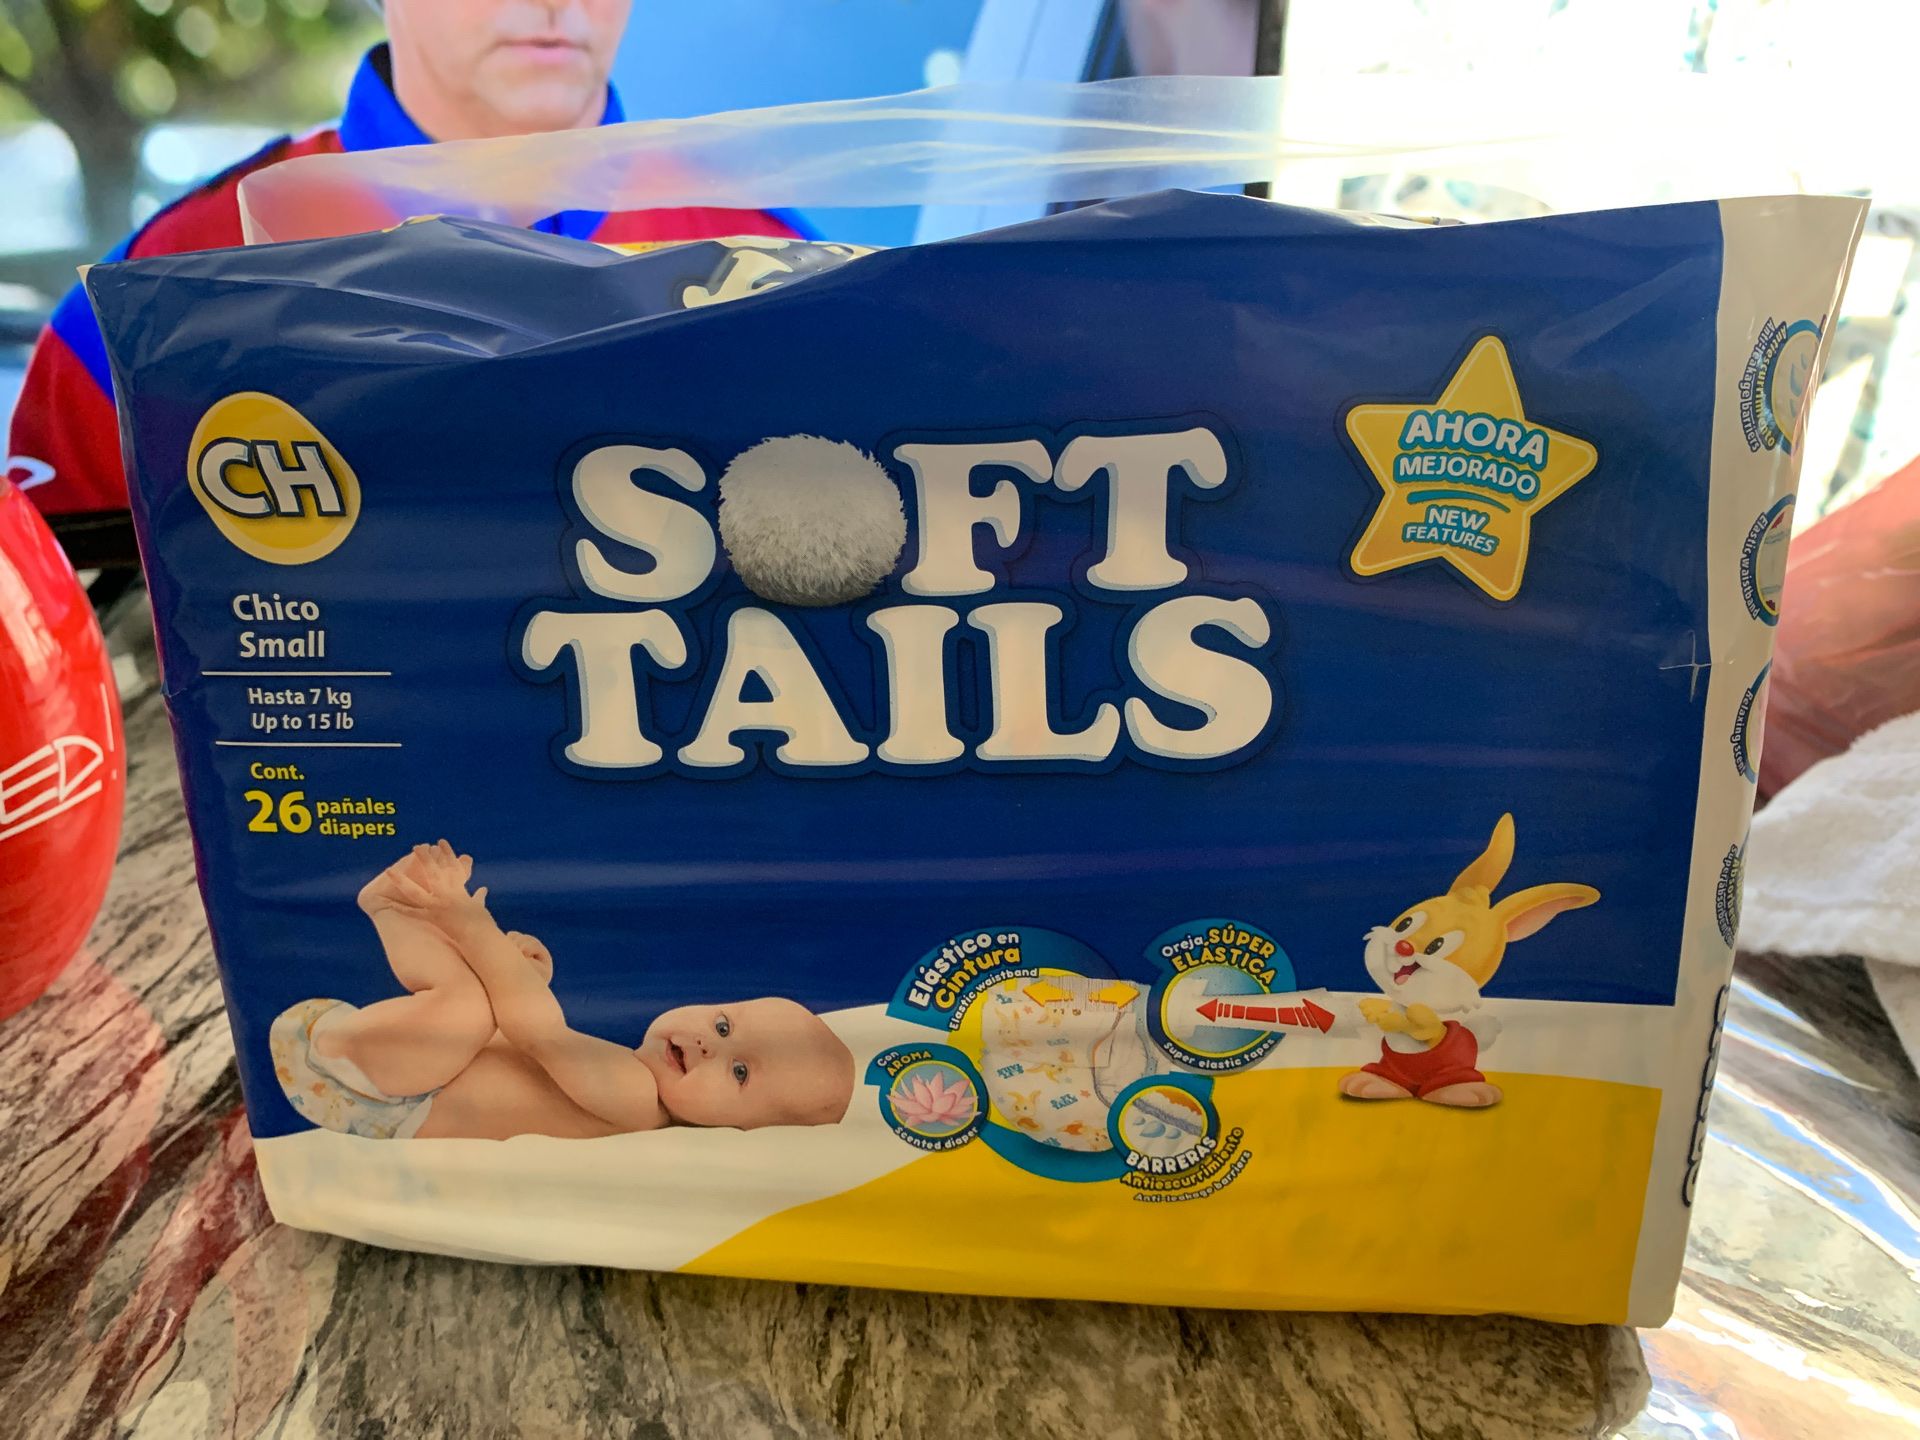 Soft tails diapers/panales